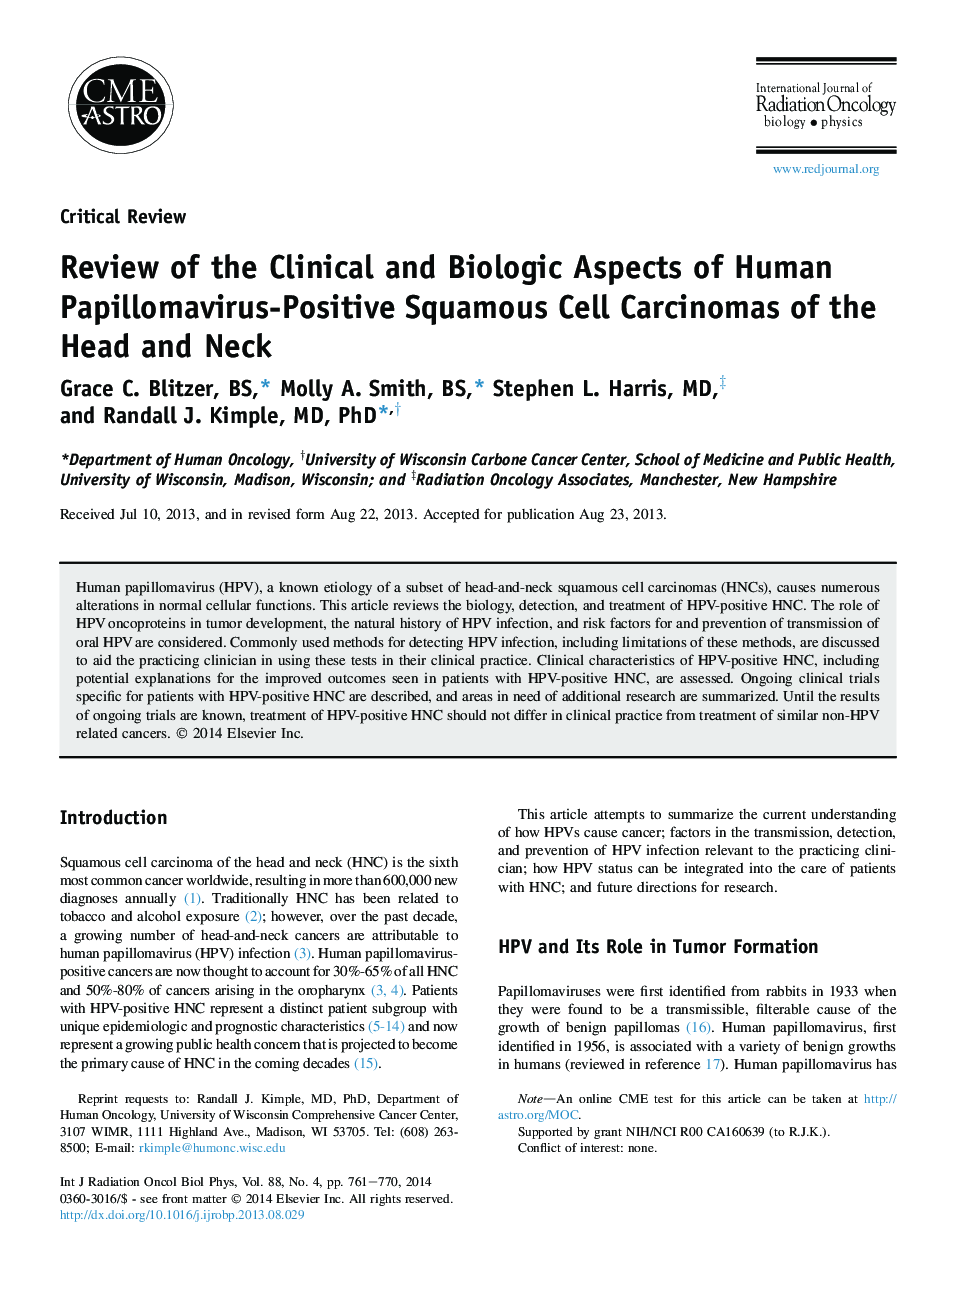 Review of the Clinical and Biologic Aspects of Human Papillomavirus-Positive Squamous Cell Carcinomas of the Head and Neck